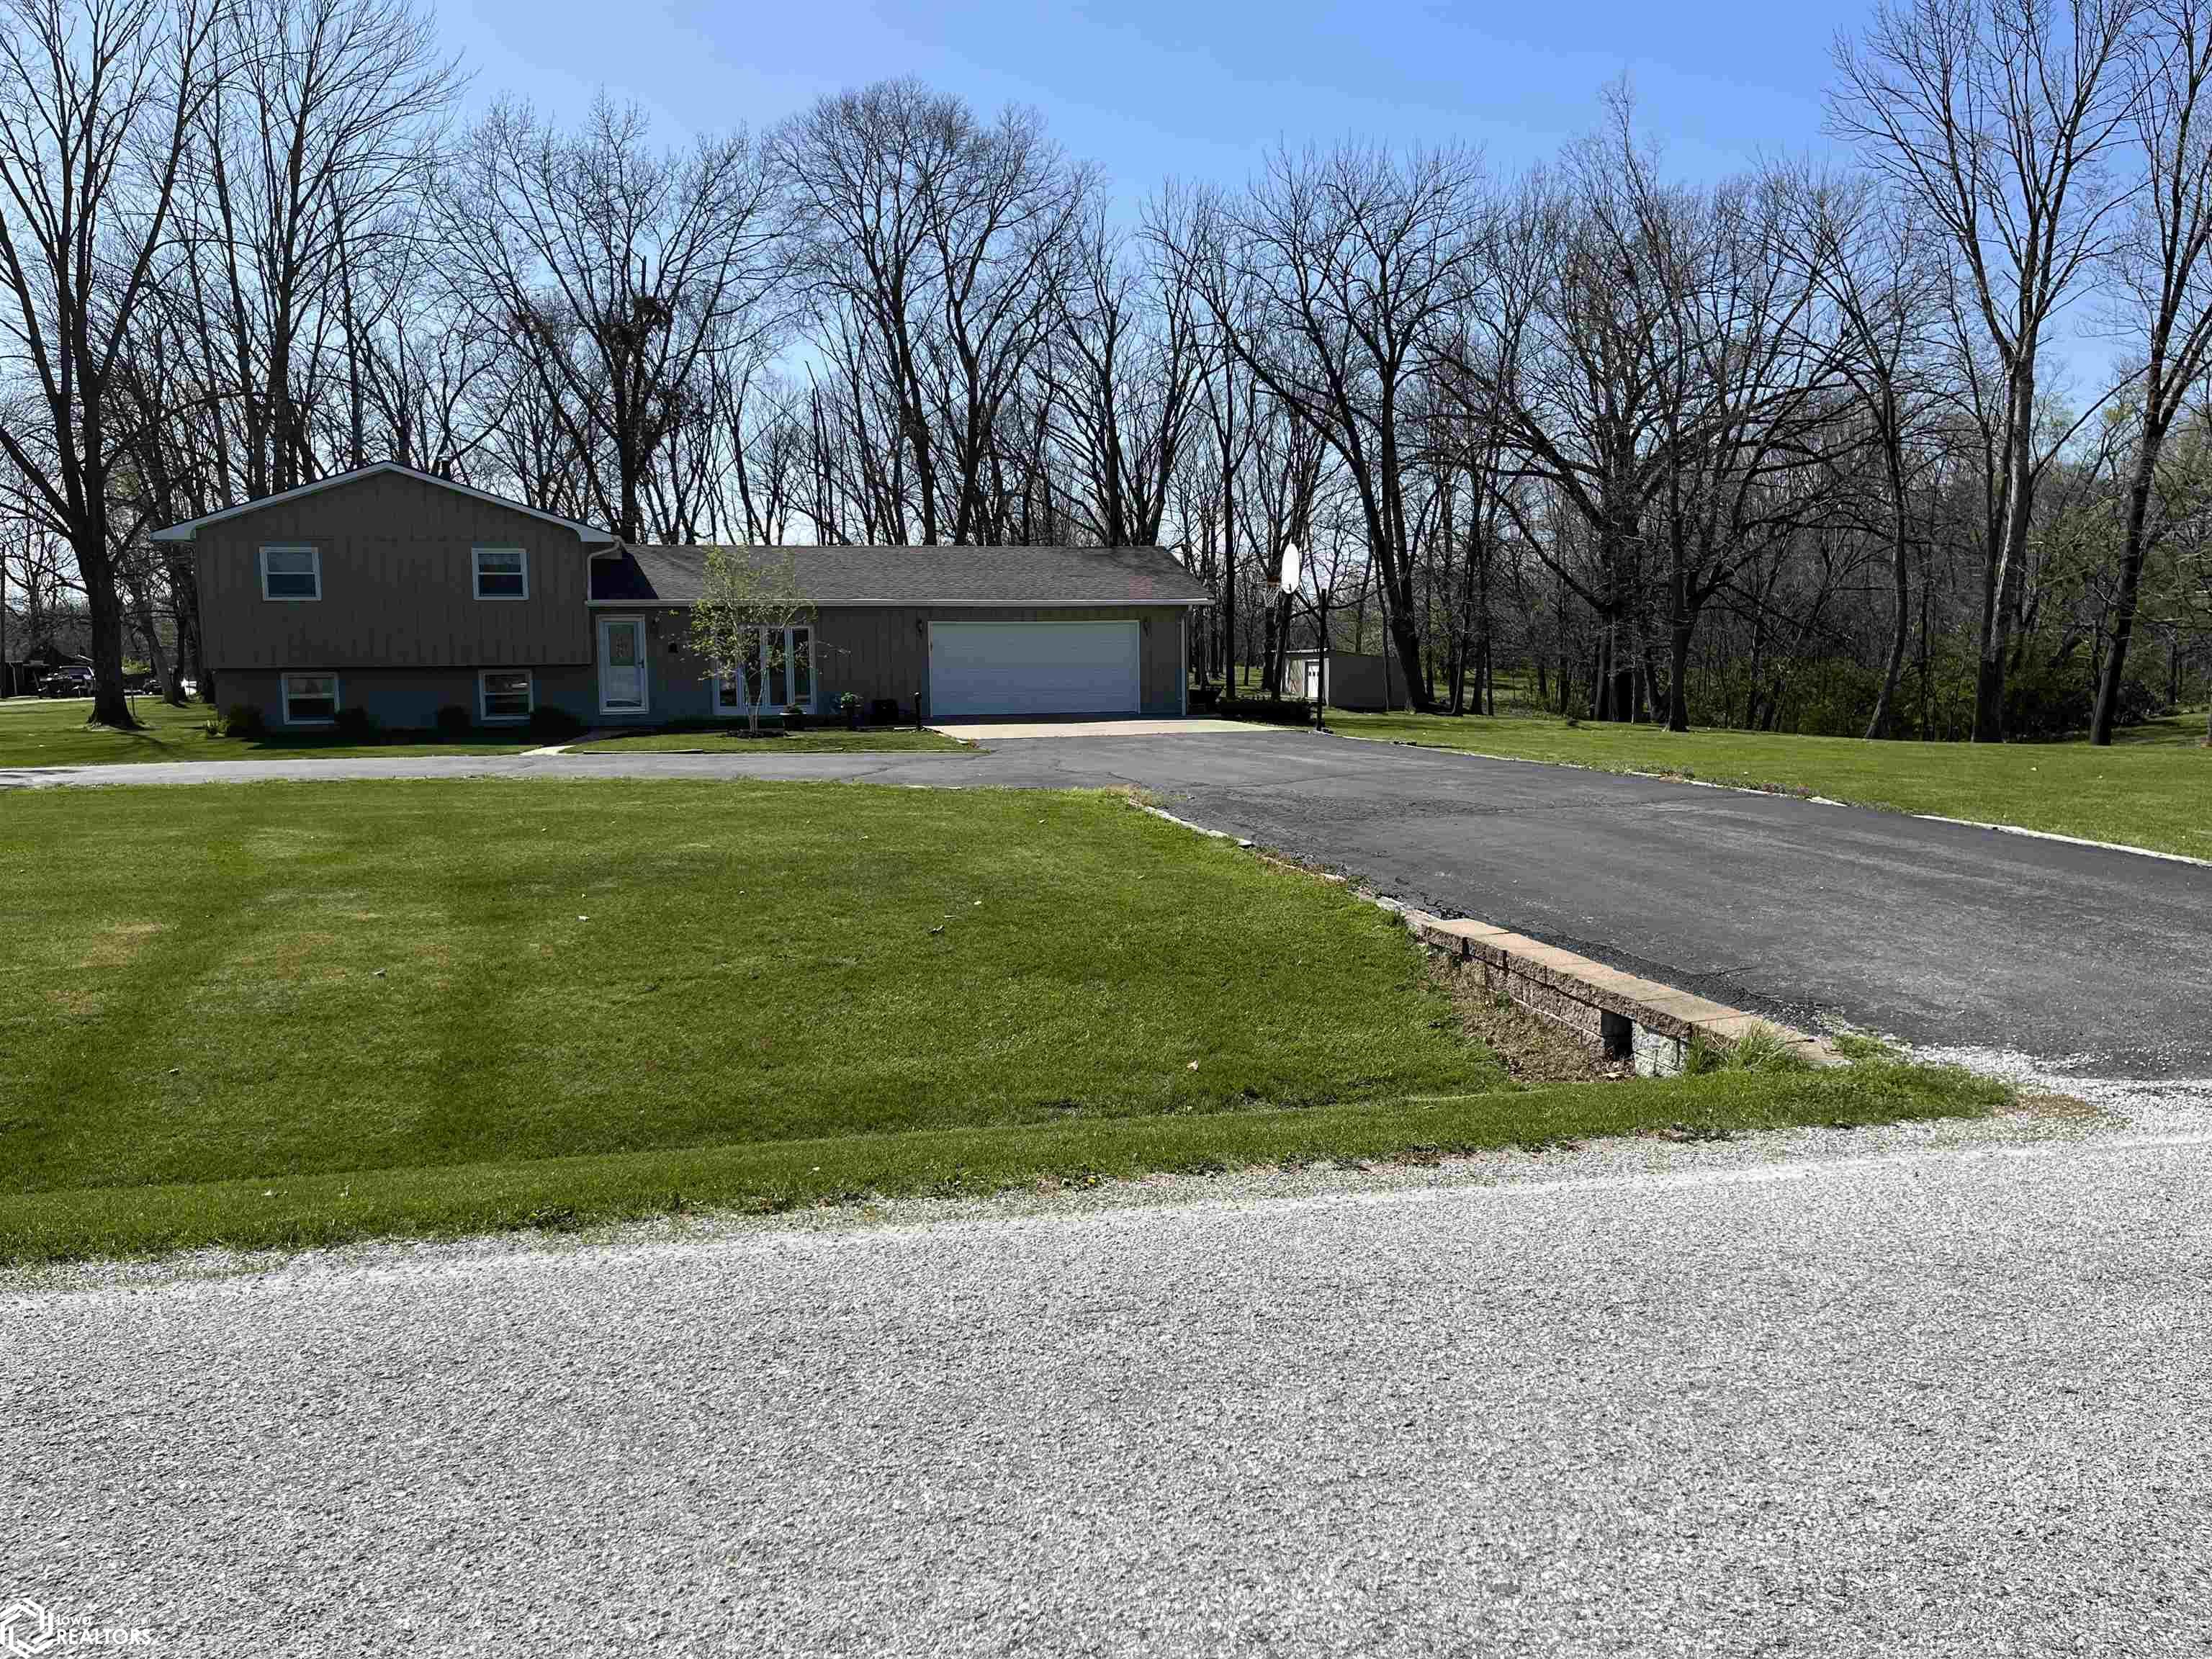 1470 N COUNTY RD 800, Hamilton, Illinois 62341, 3 Bedrooms Bedrooms, ,2 BathroomsBathrooms,Single Family,For Sale,N COUNTY RD 800,6316446